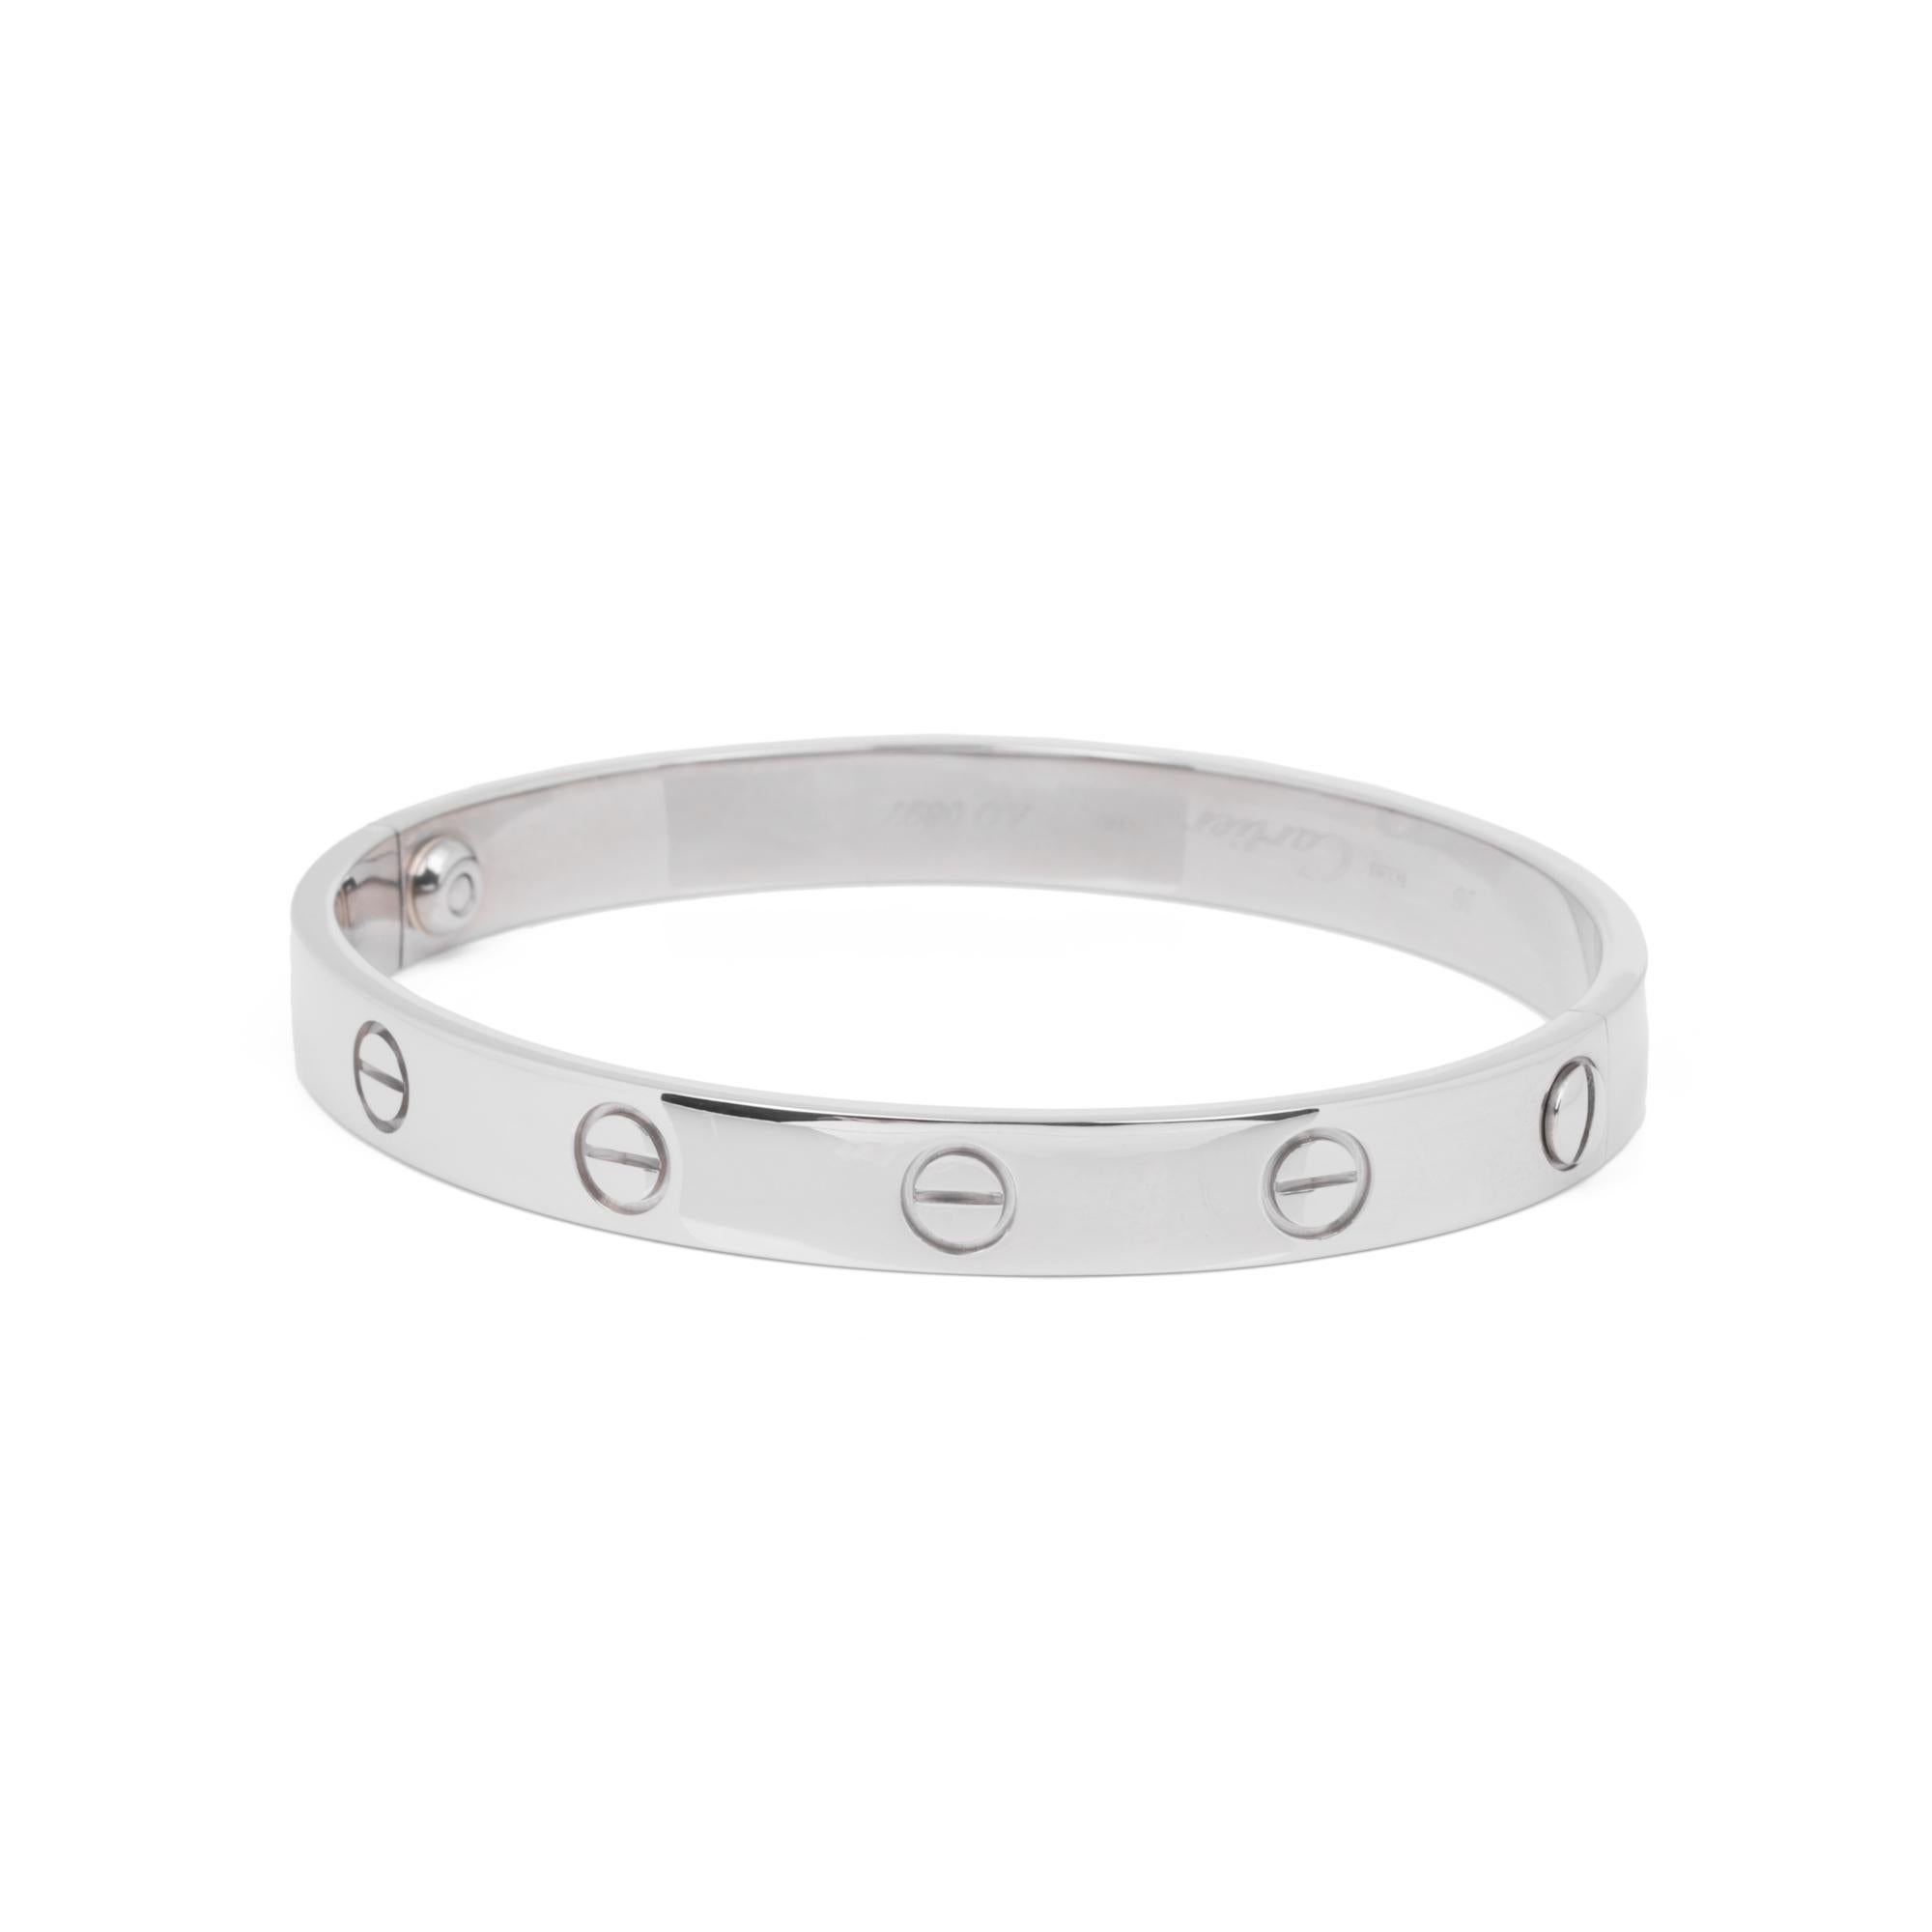 Cartier 18ct White Gold Love Bangle

Brand- Cartier
Model- Love Bangle
Product Type- Bracelet
Serial Number- AO****
Accompanied By- Cartier Pouch, Service Papers, Screwdriver
Material(s)- 18ct White Gold

Bracelet Length- 16cm
Bracelet Width-